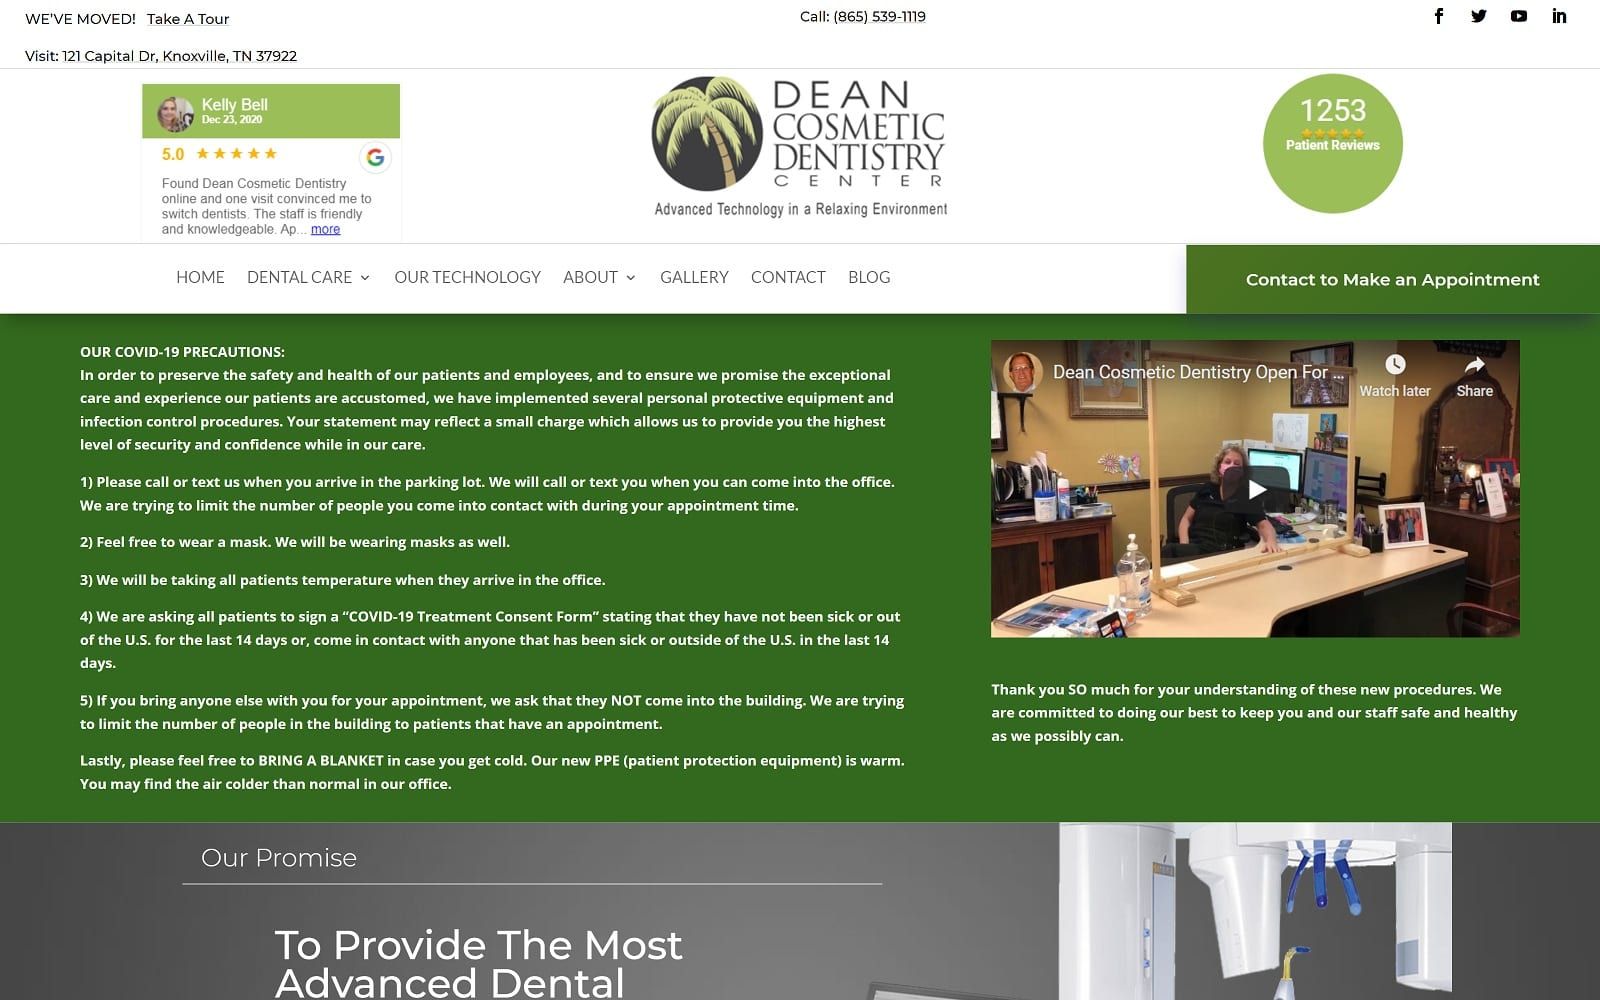 The Screenshot of Dean Cosmetic Dentistry Center deancosmeticdentistry.com Dr. Donnie Dean Website